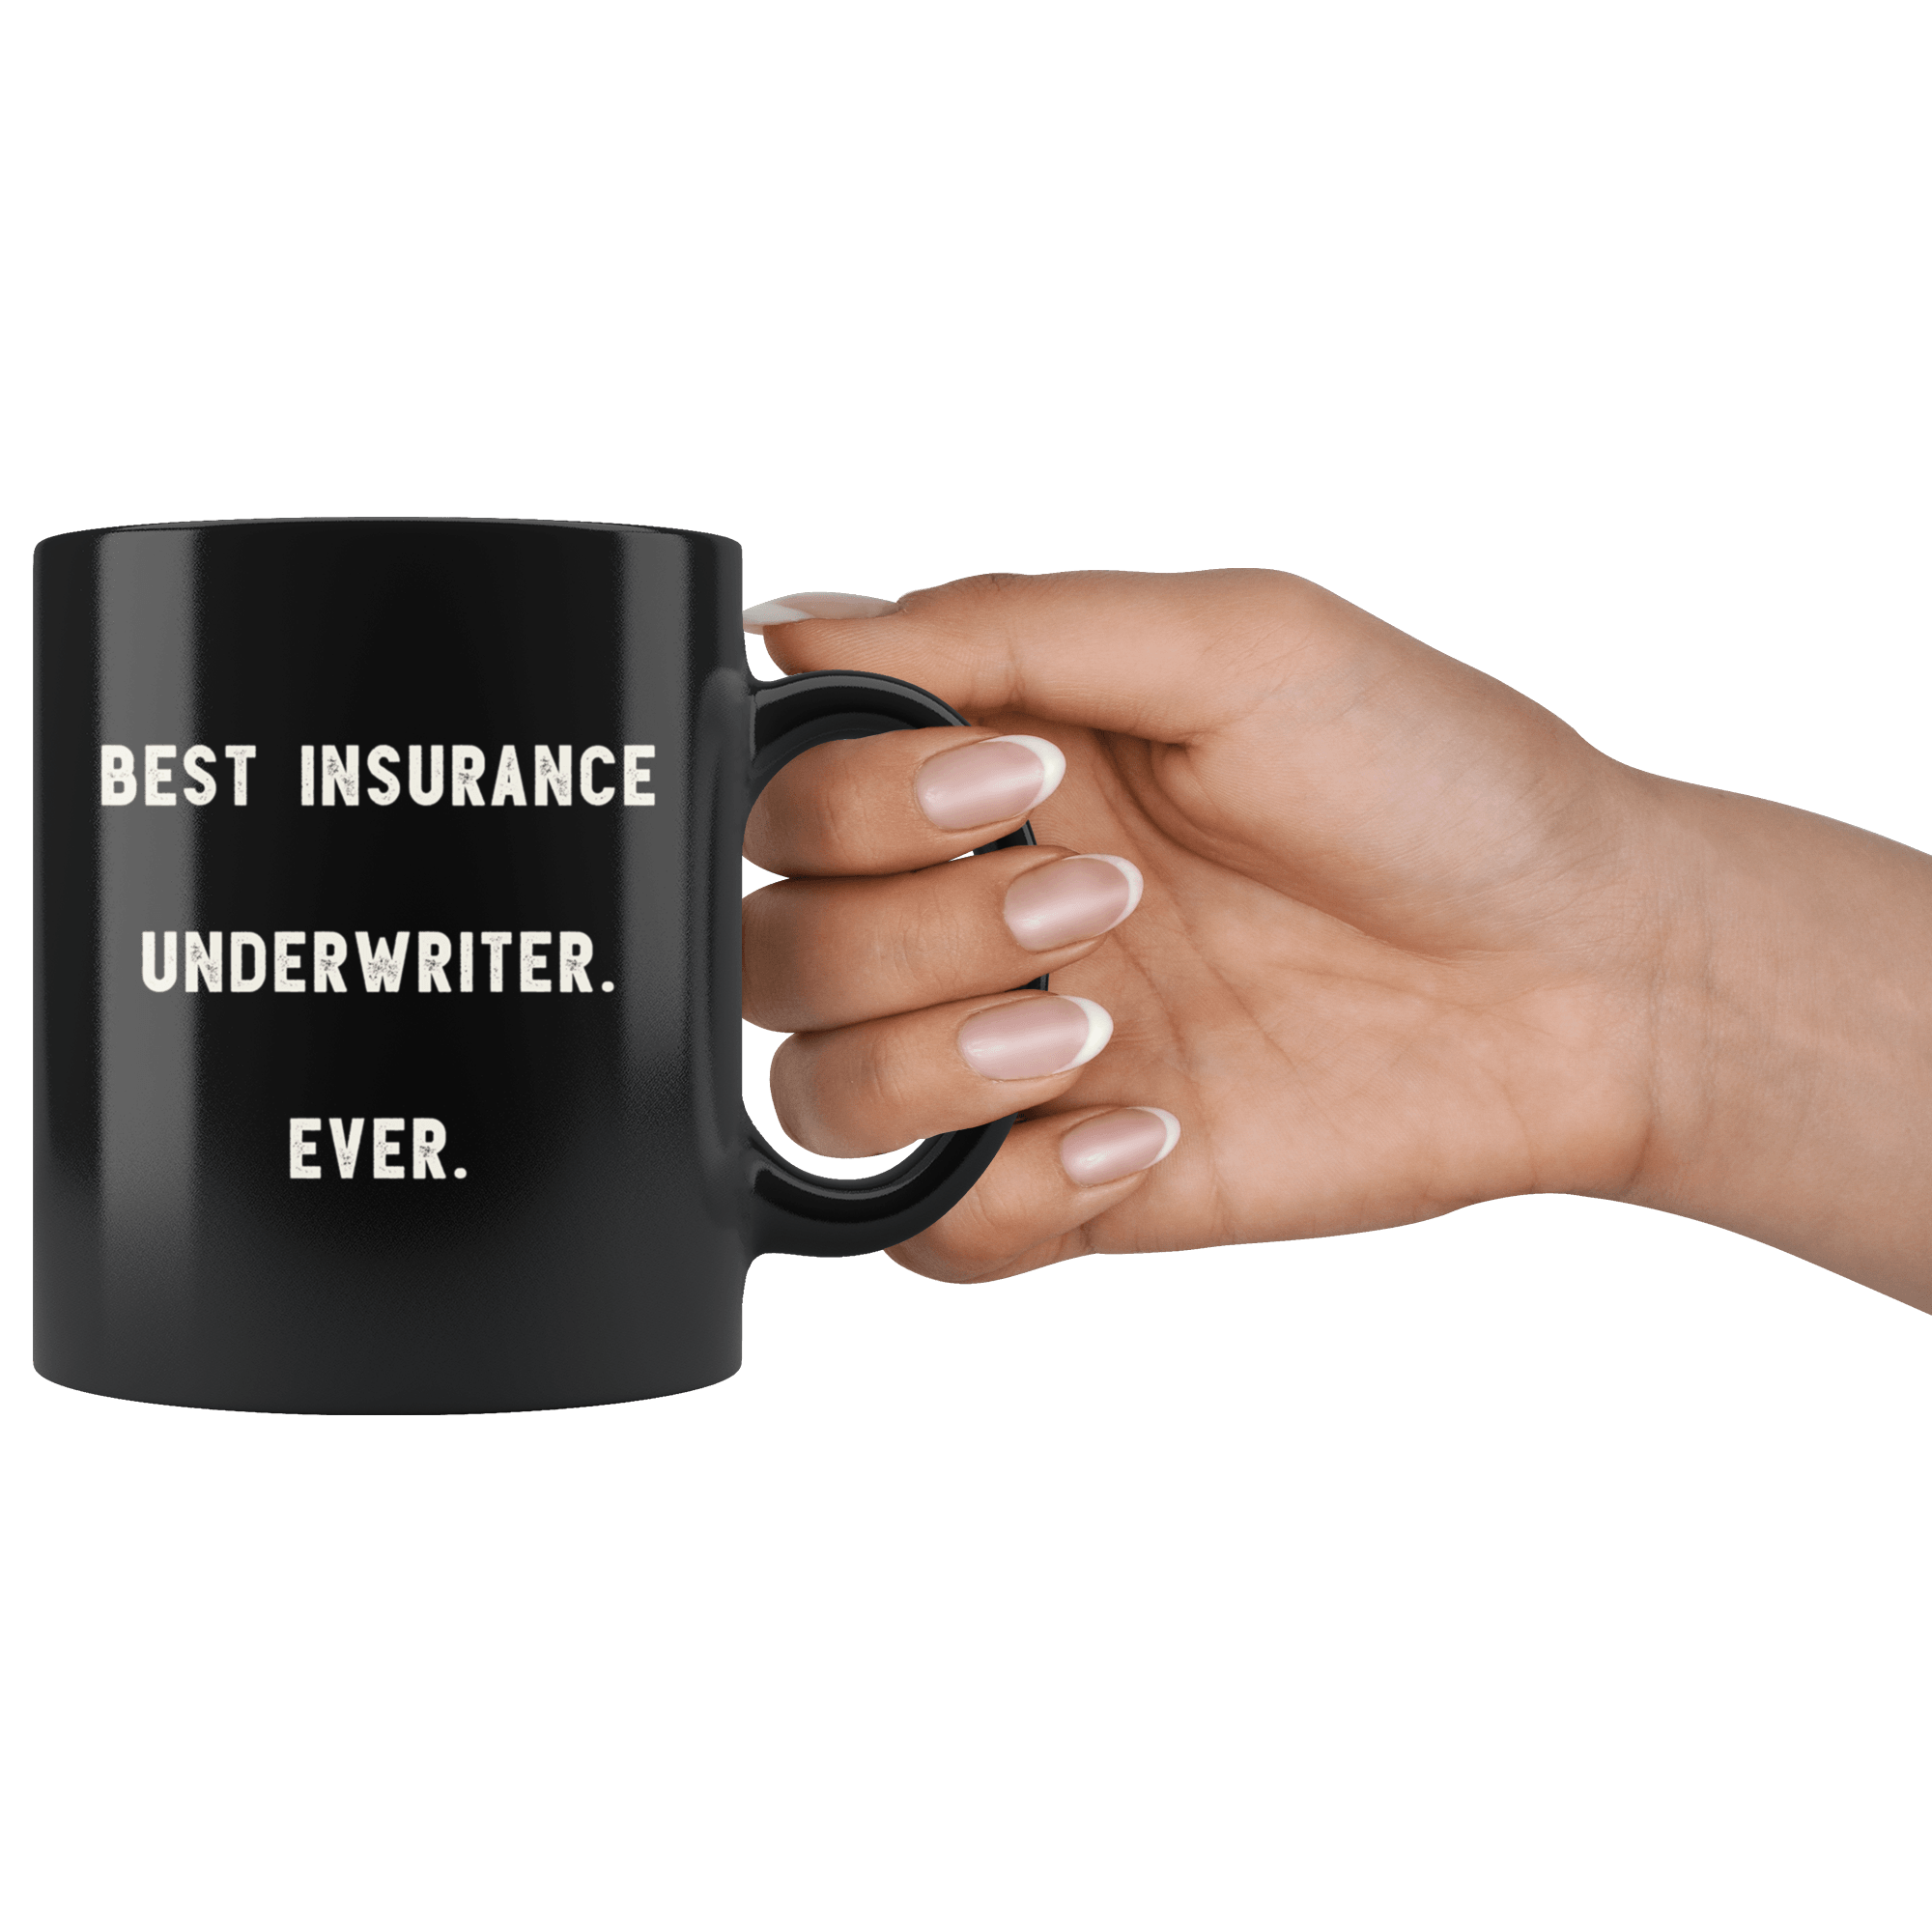 Best Neighbor. Ever. The Funny Coworker Office Gag Gifts White 11oz Mu –  RobustCreative